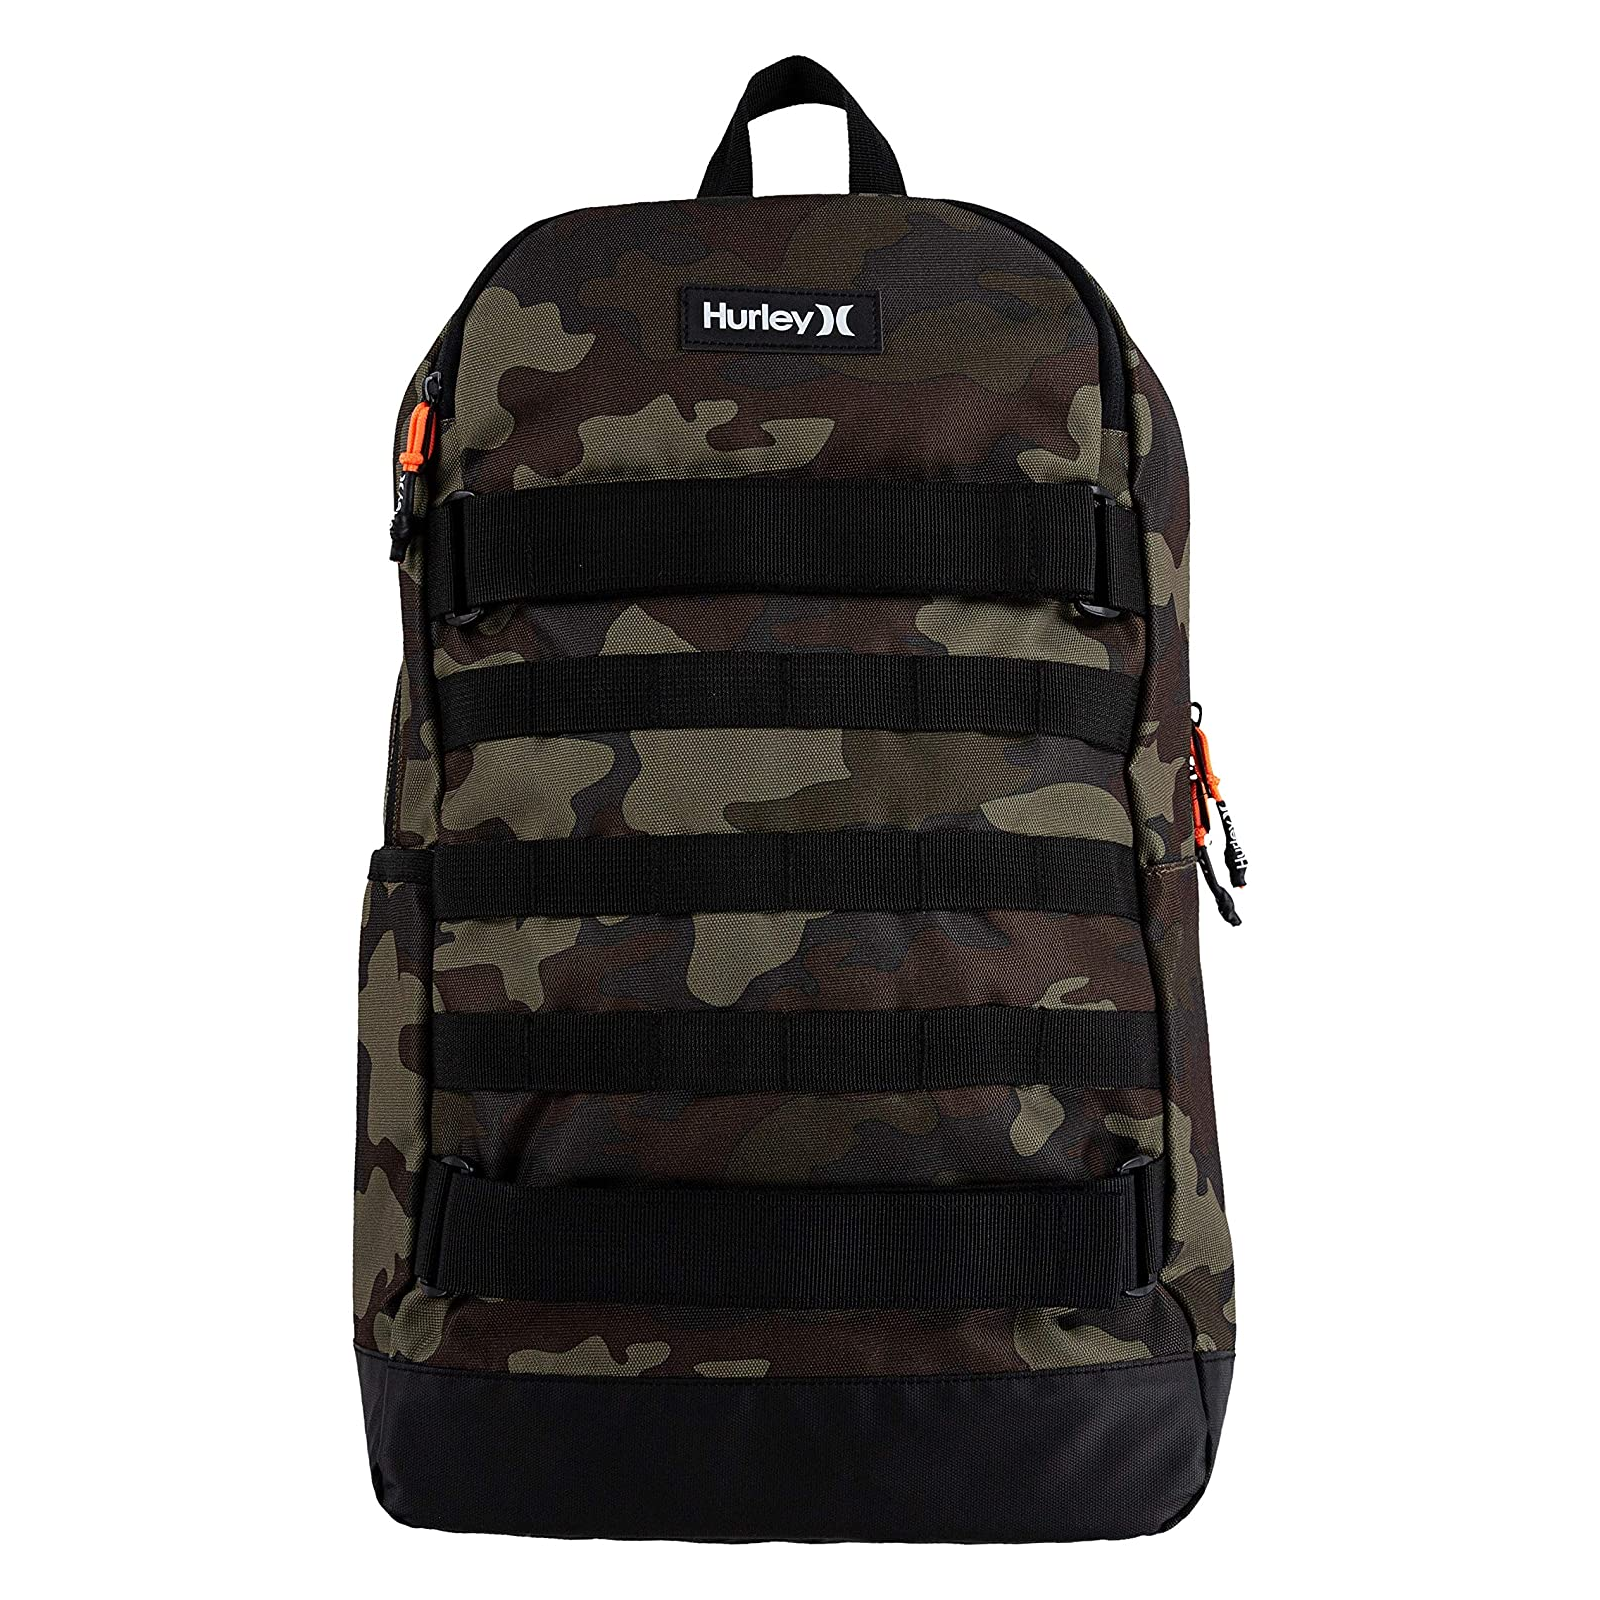 Рюкзак Hurley no comply Backpack. Hurley рюкзак хаки. Рюкзак Hurley Golden Doodle. Рюкзак Hurley x зелёный папоротник. Only packs